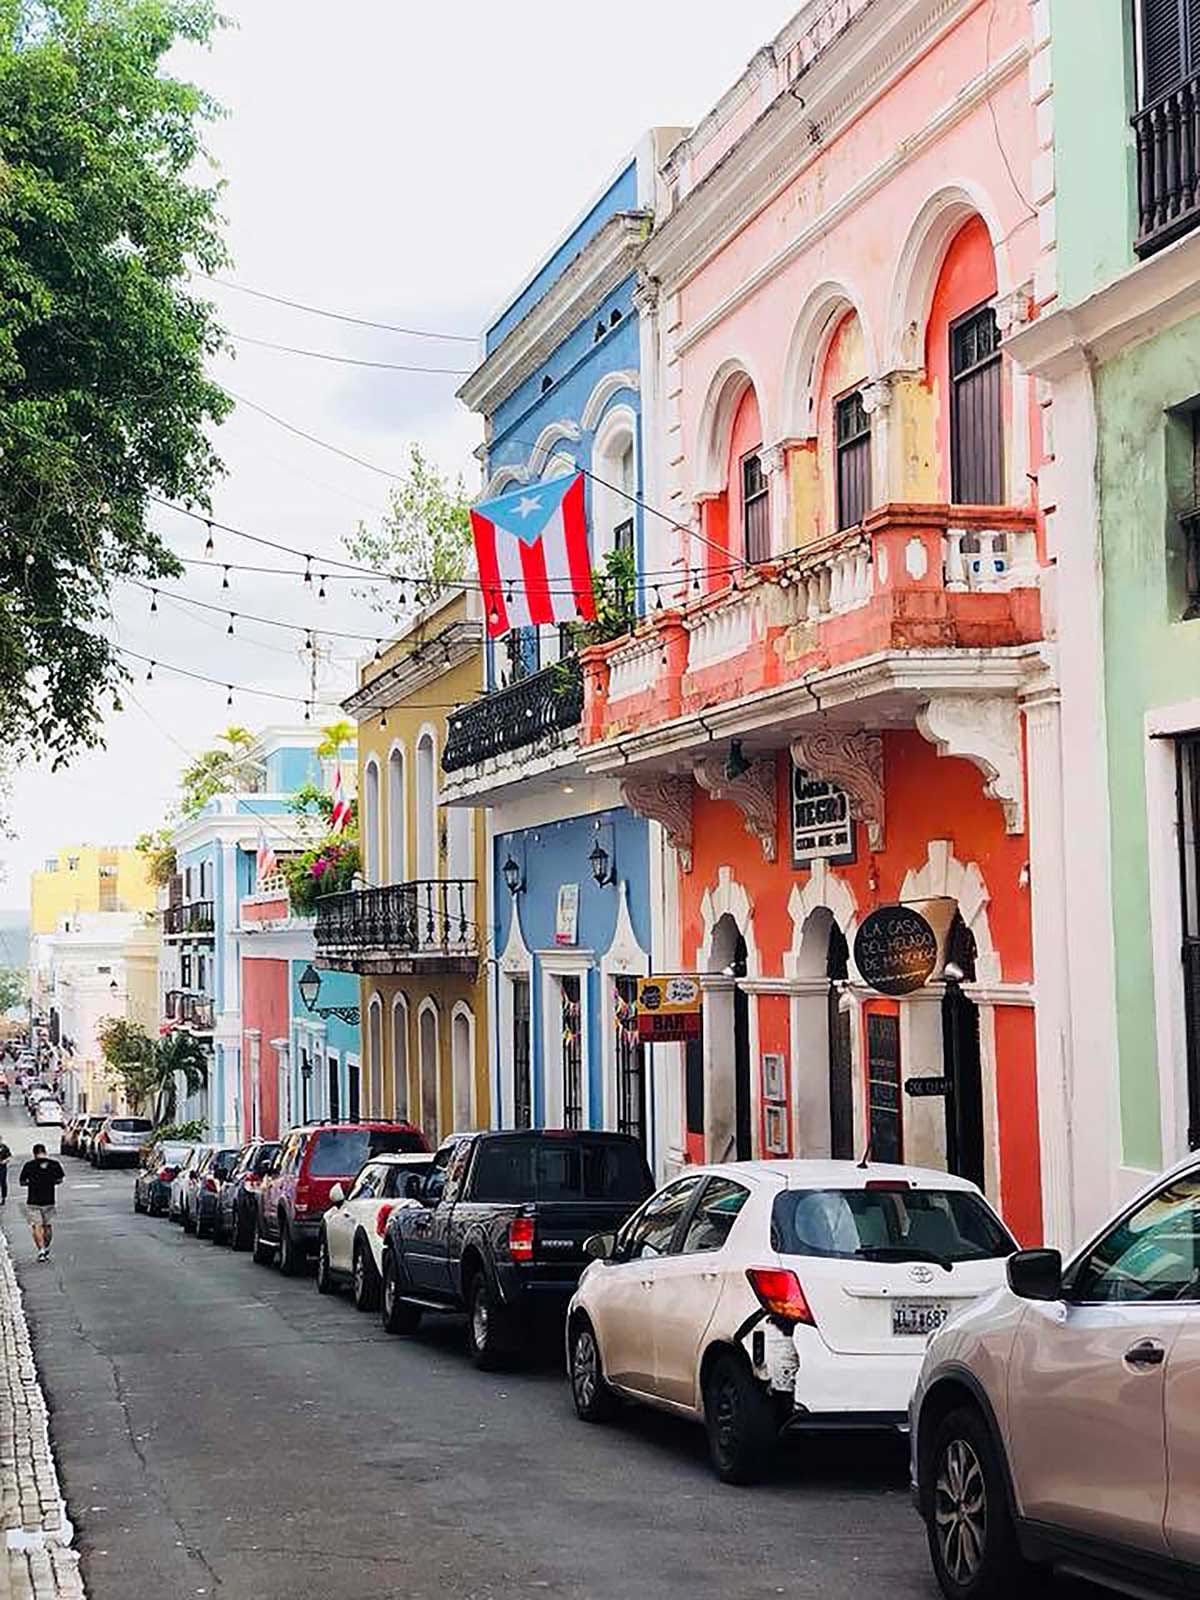 Row of colorful buildings on city street in Puerto Rico